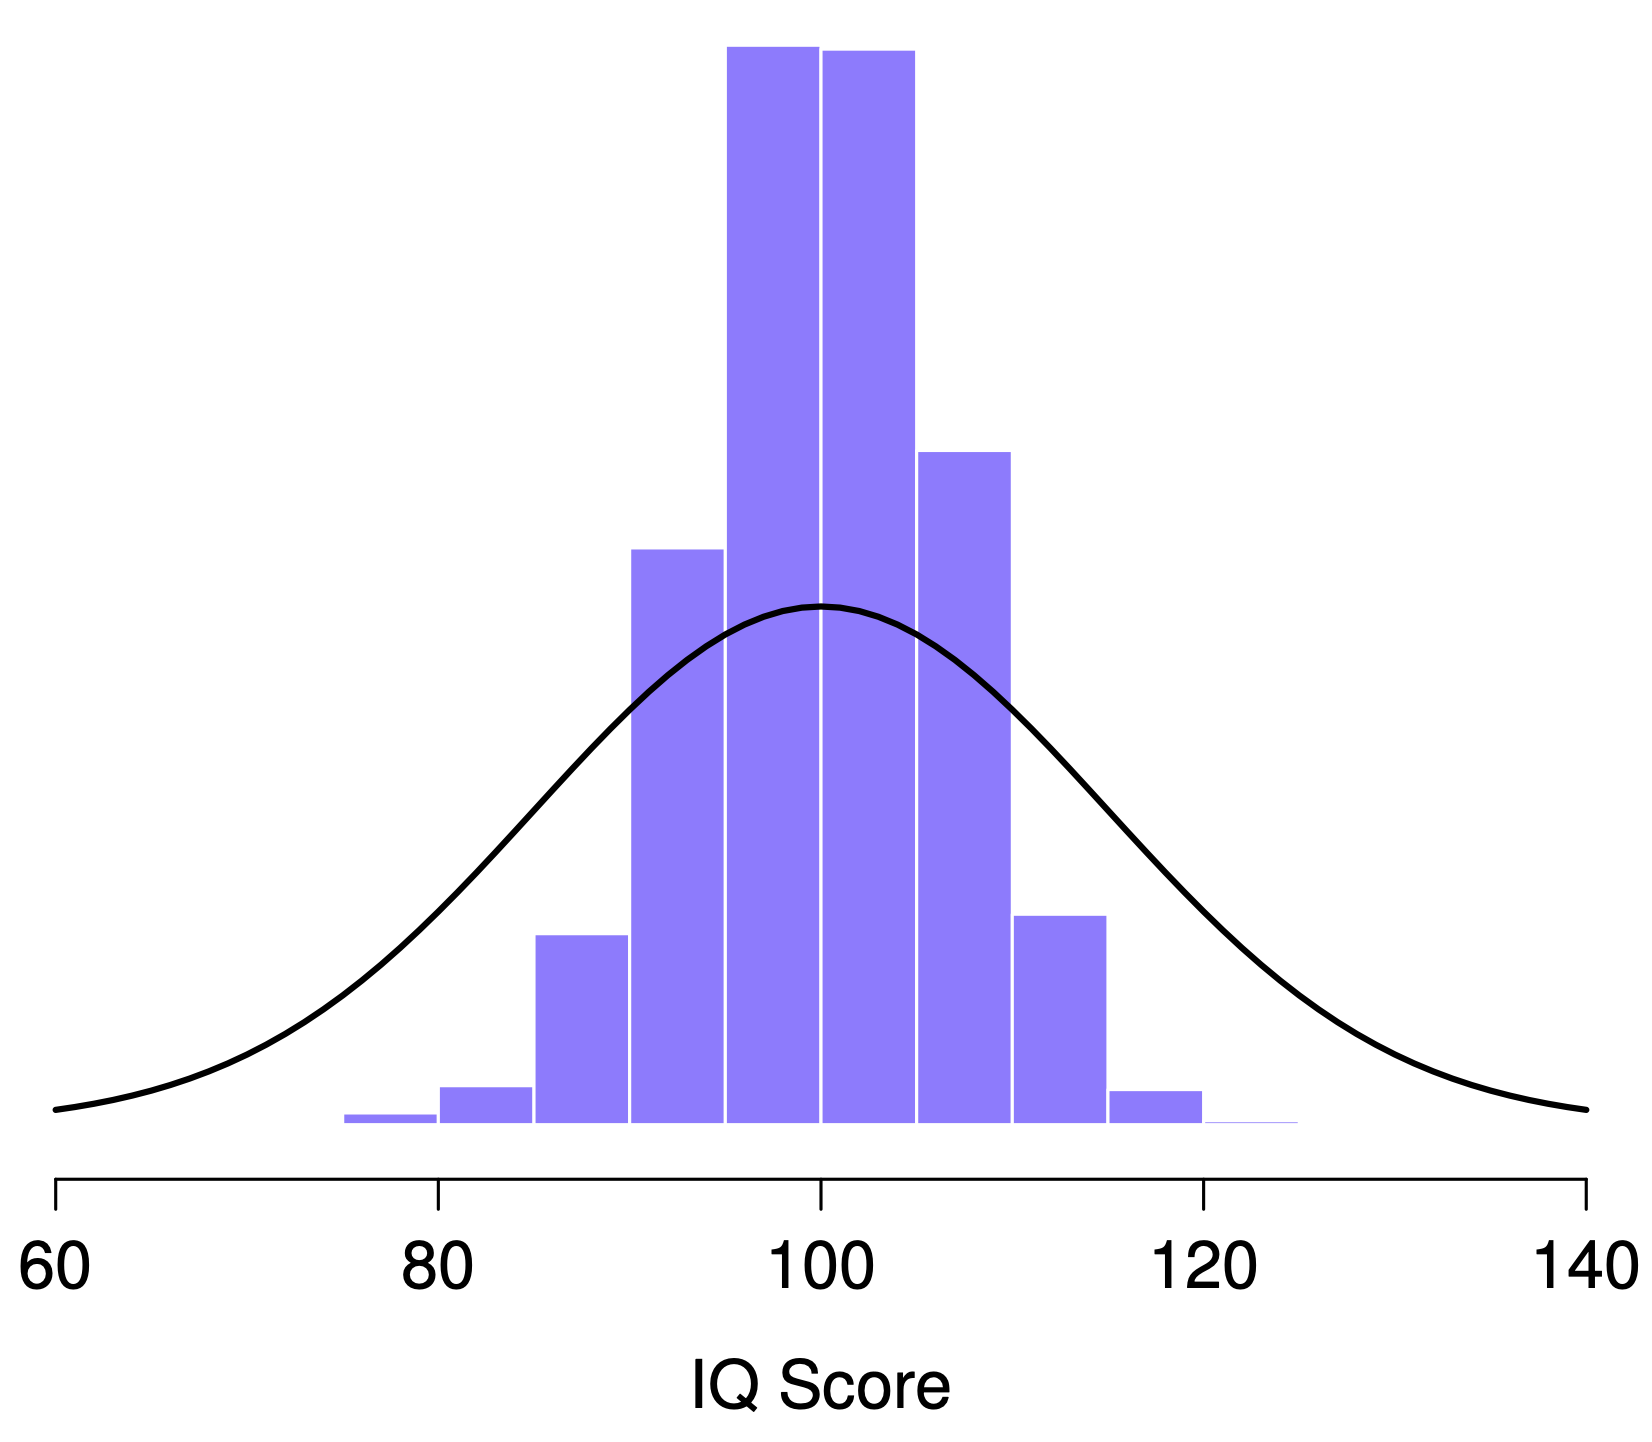 The sampling distribution of the mean for the “five IQ scores experiment”. If you sample 5 people at random and calculate their average IQ, you’ll almost certainly get a number between 80 and 120, even though there are quite a lot of individuals who have IQs above 120 or below 80. For comparison, the black line plots the population distribution of IQ scores.